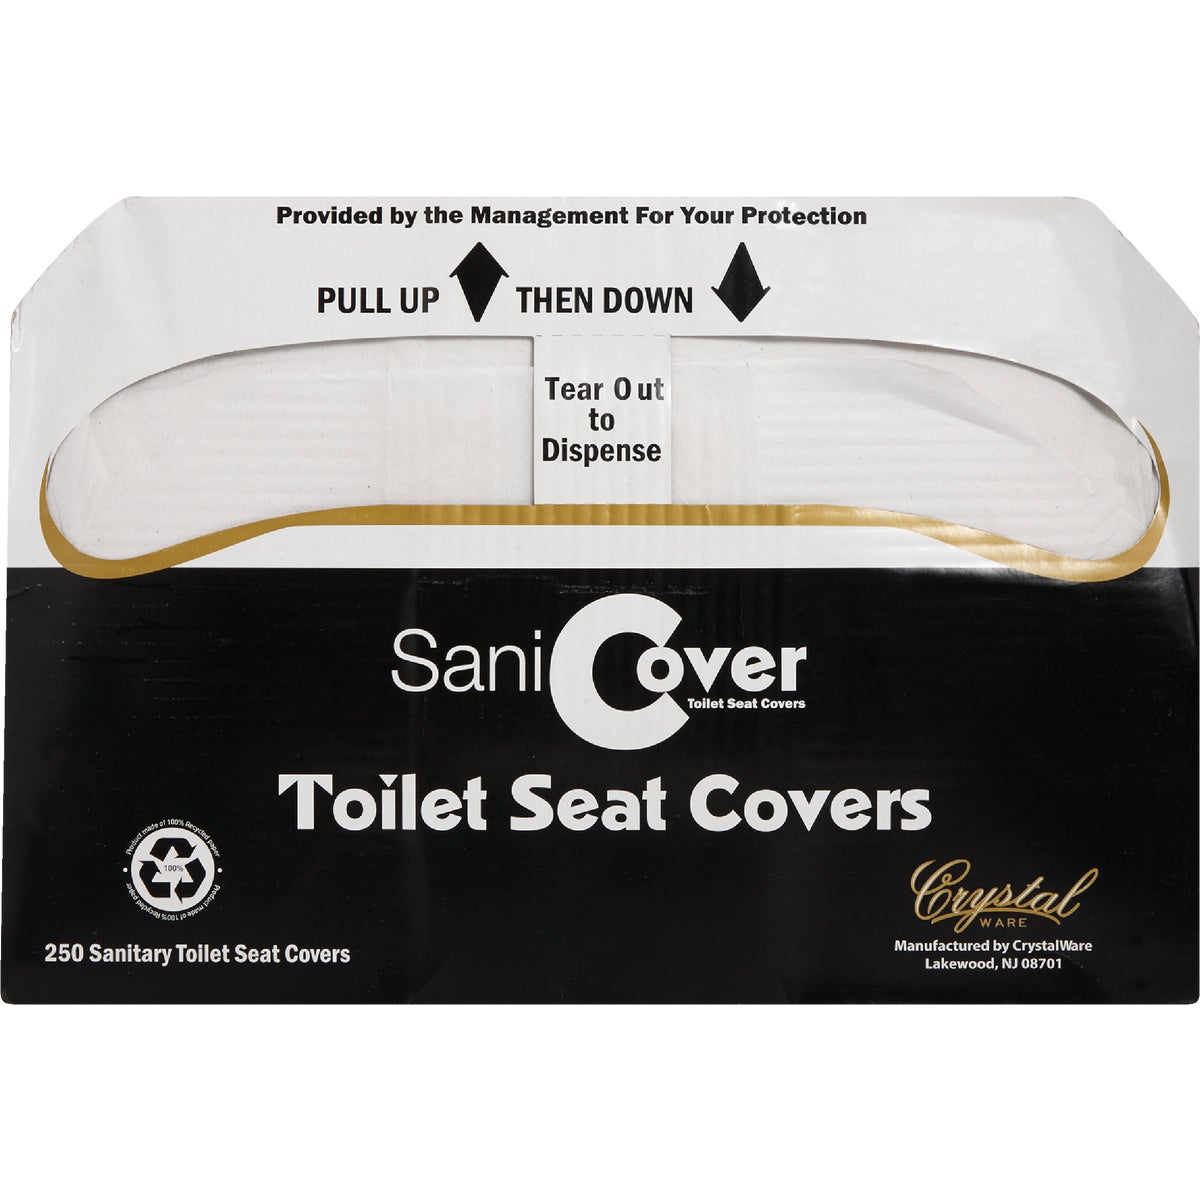 Crystal Ware SaniCover Paper Toilet Seat Cover